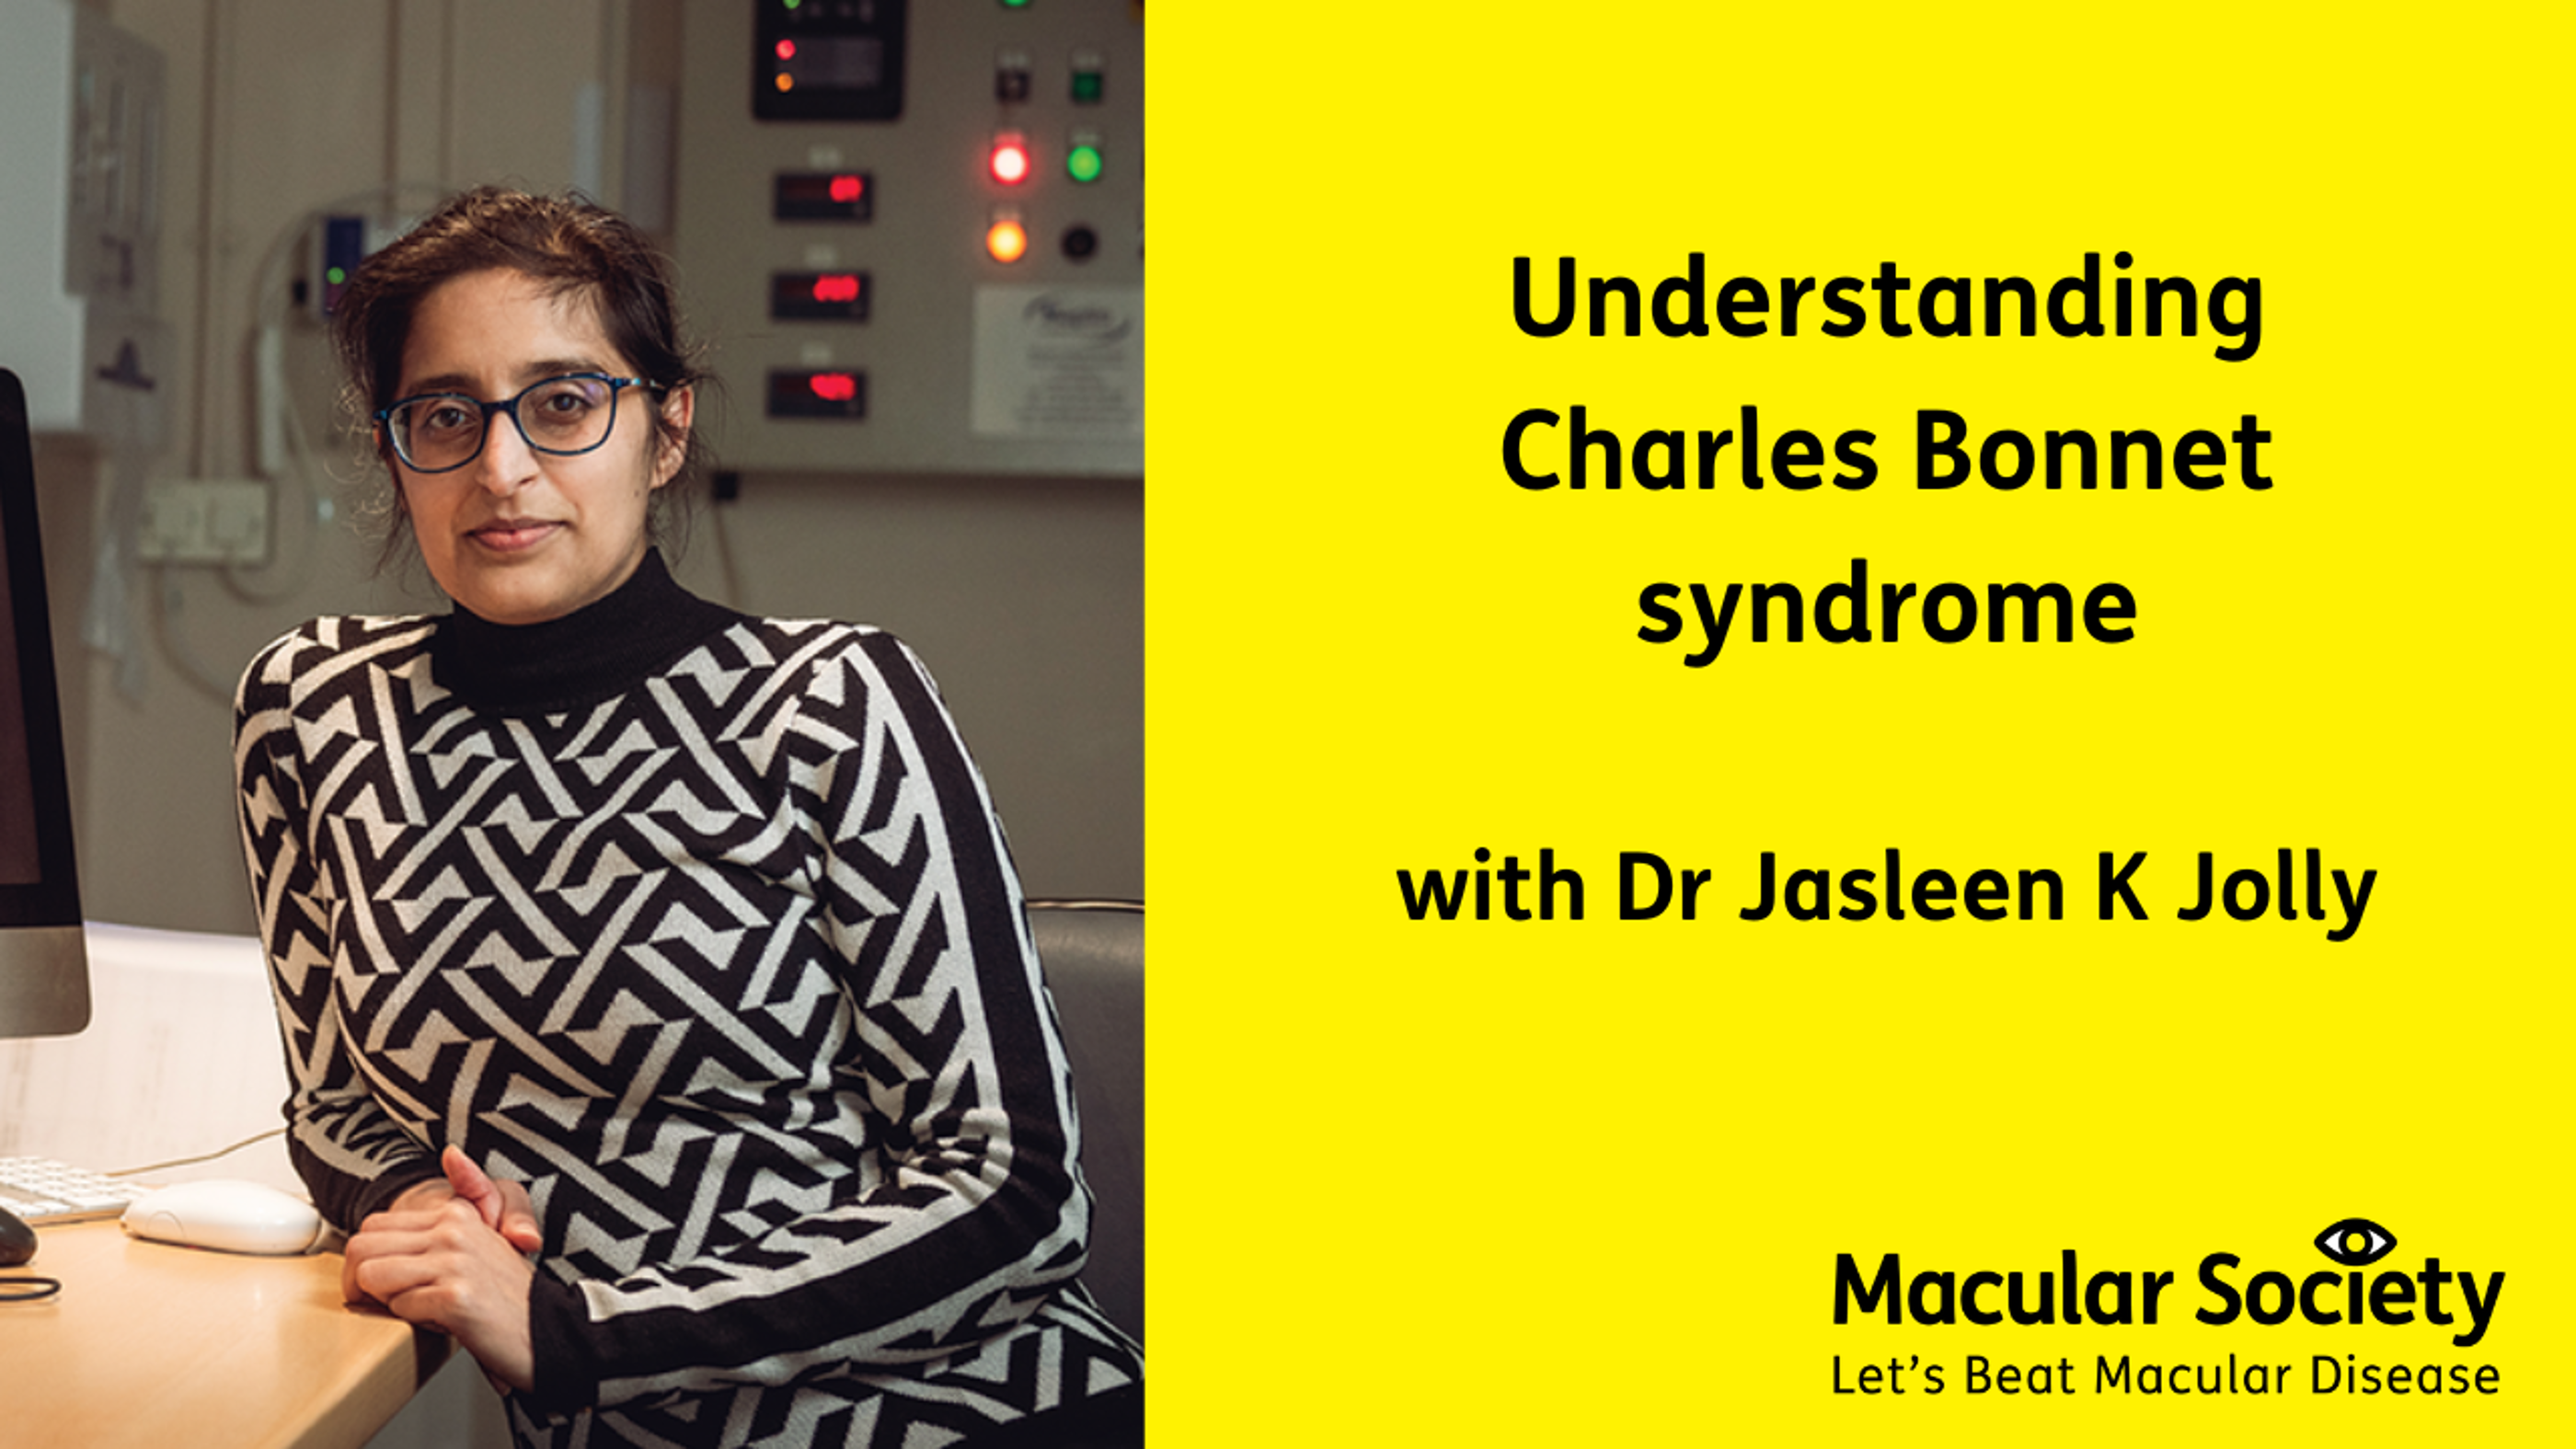 Understanding Charles Bonnet Syndrome with Dr Jasleen Jolly